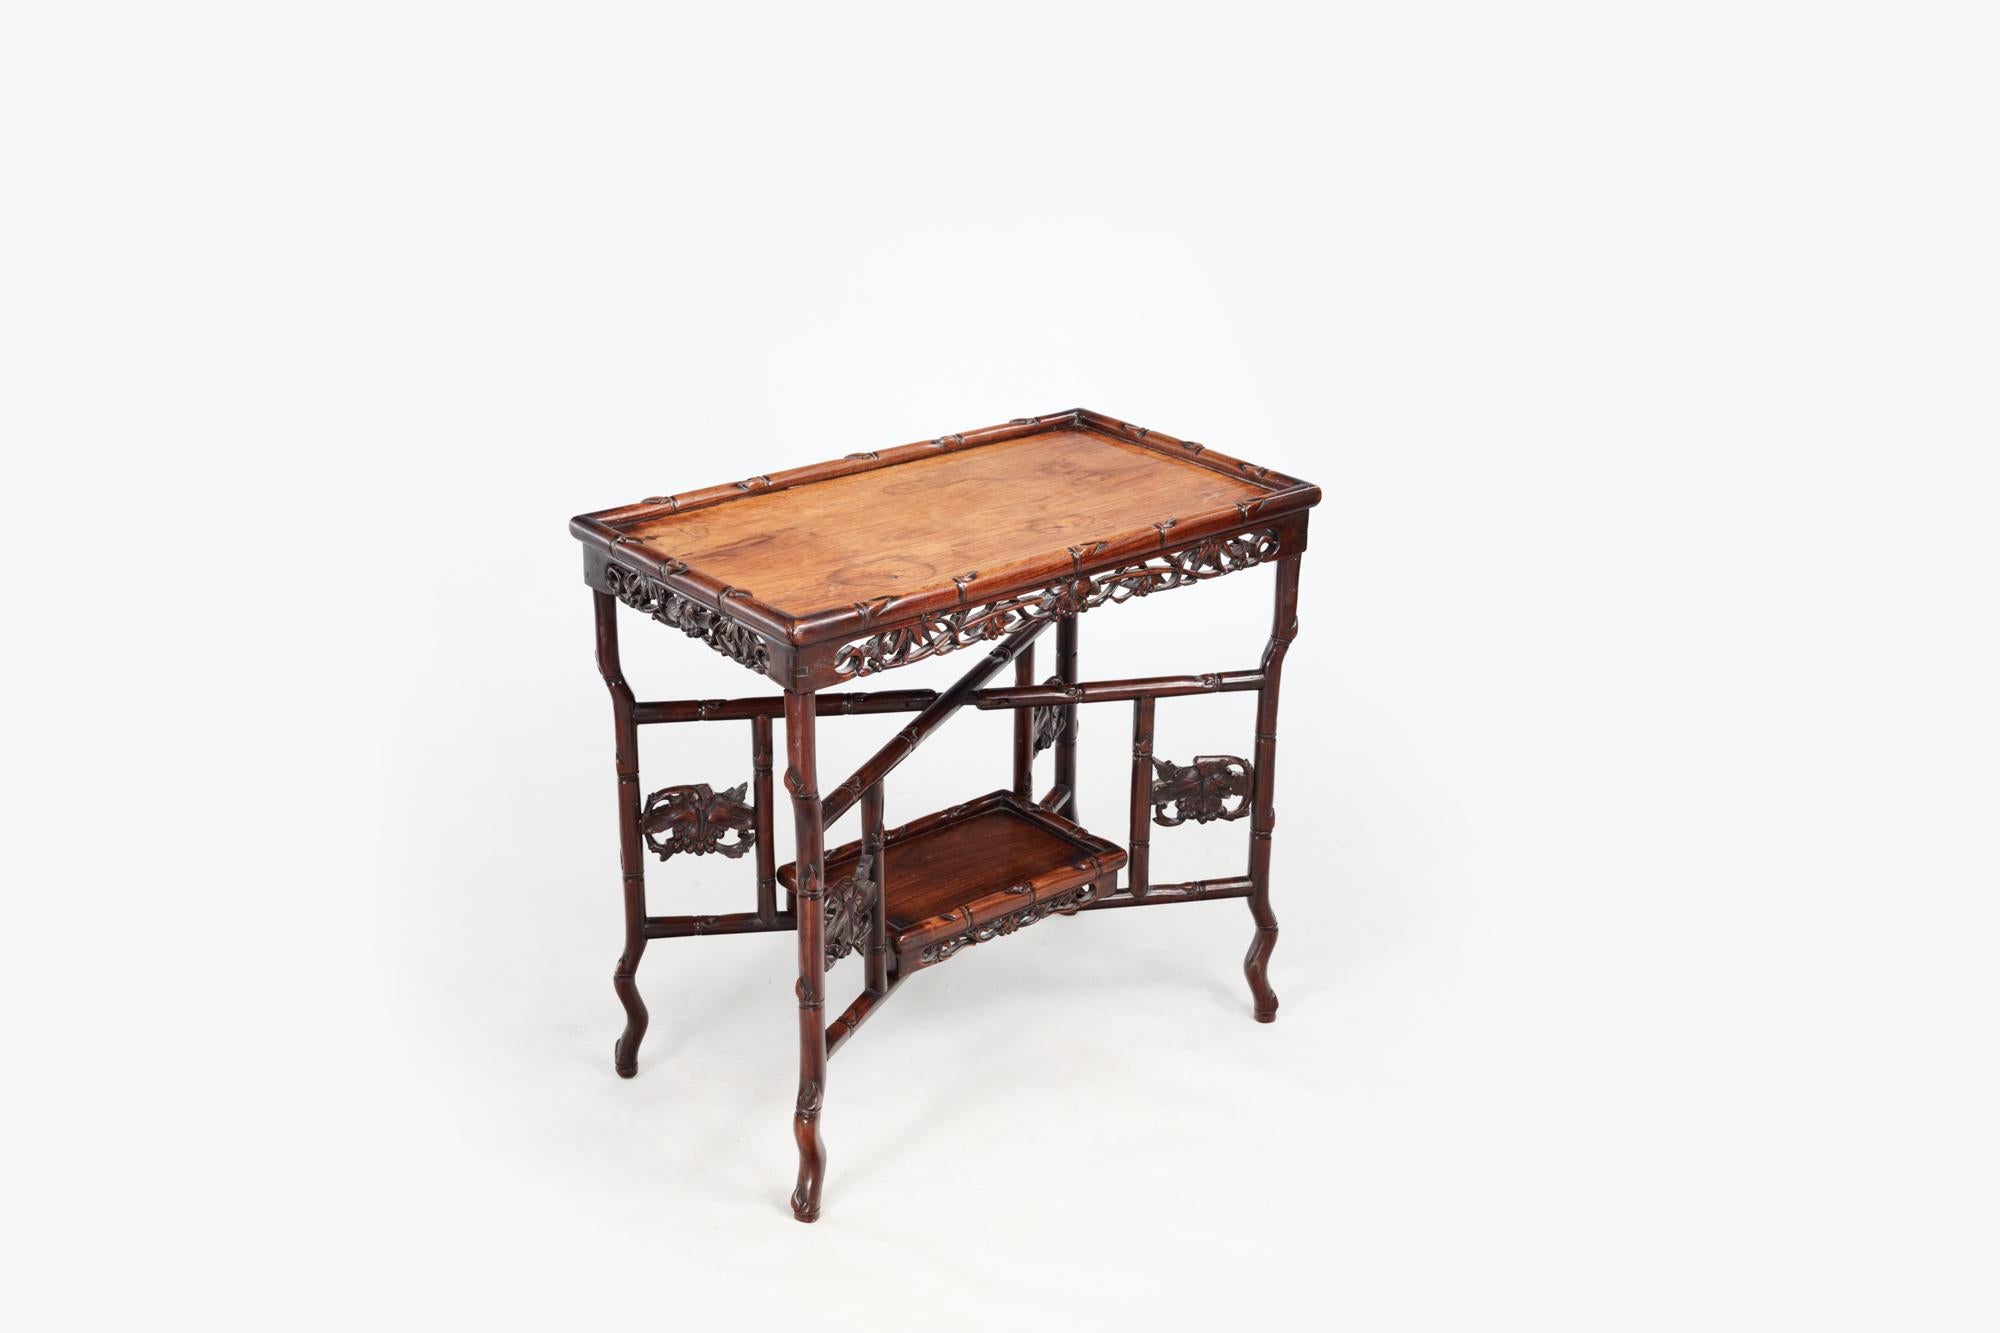 19th Century Qing Chinese export hardwood tray top table with folding frame and removable undertier. The heavy rectangular tray top with a decorative carved apron above a folding hinged 'x' shaped stretcher base with carved legs and stylised bamboo